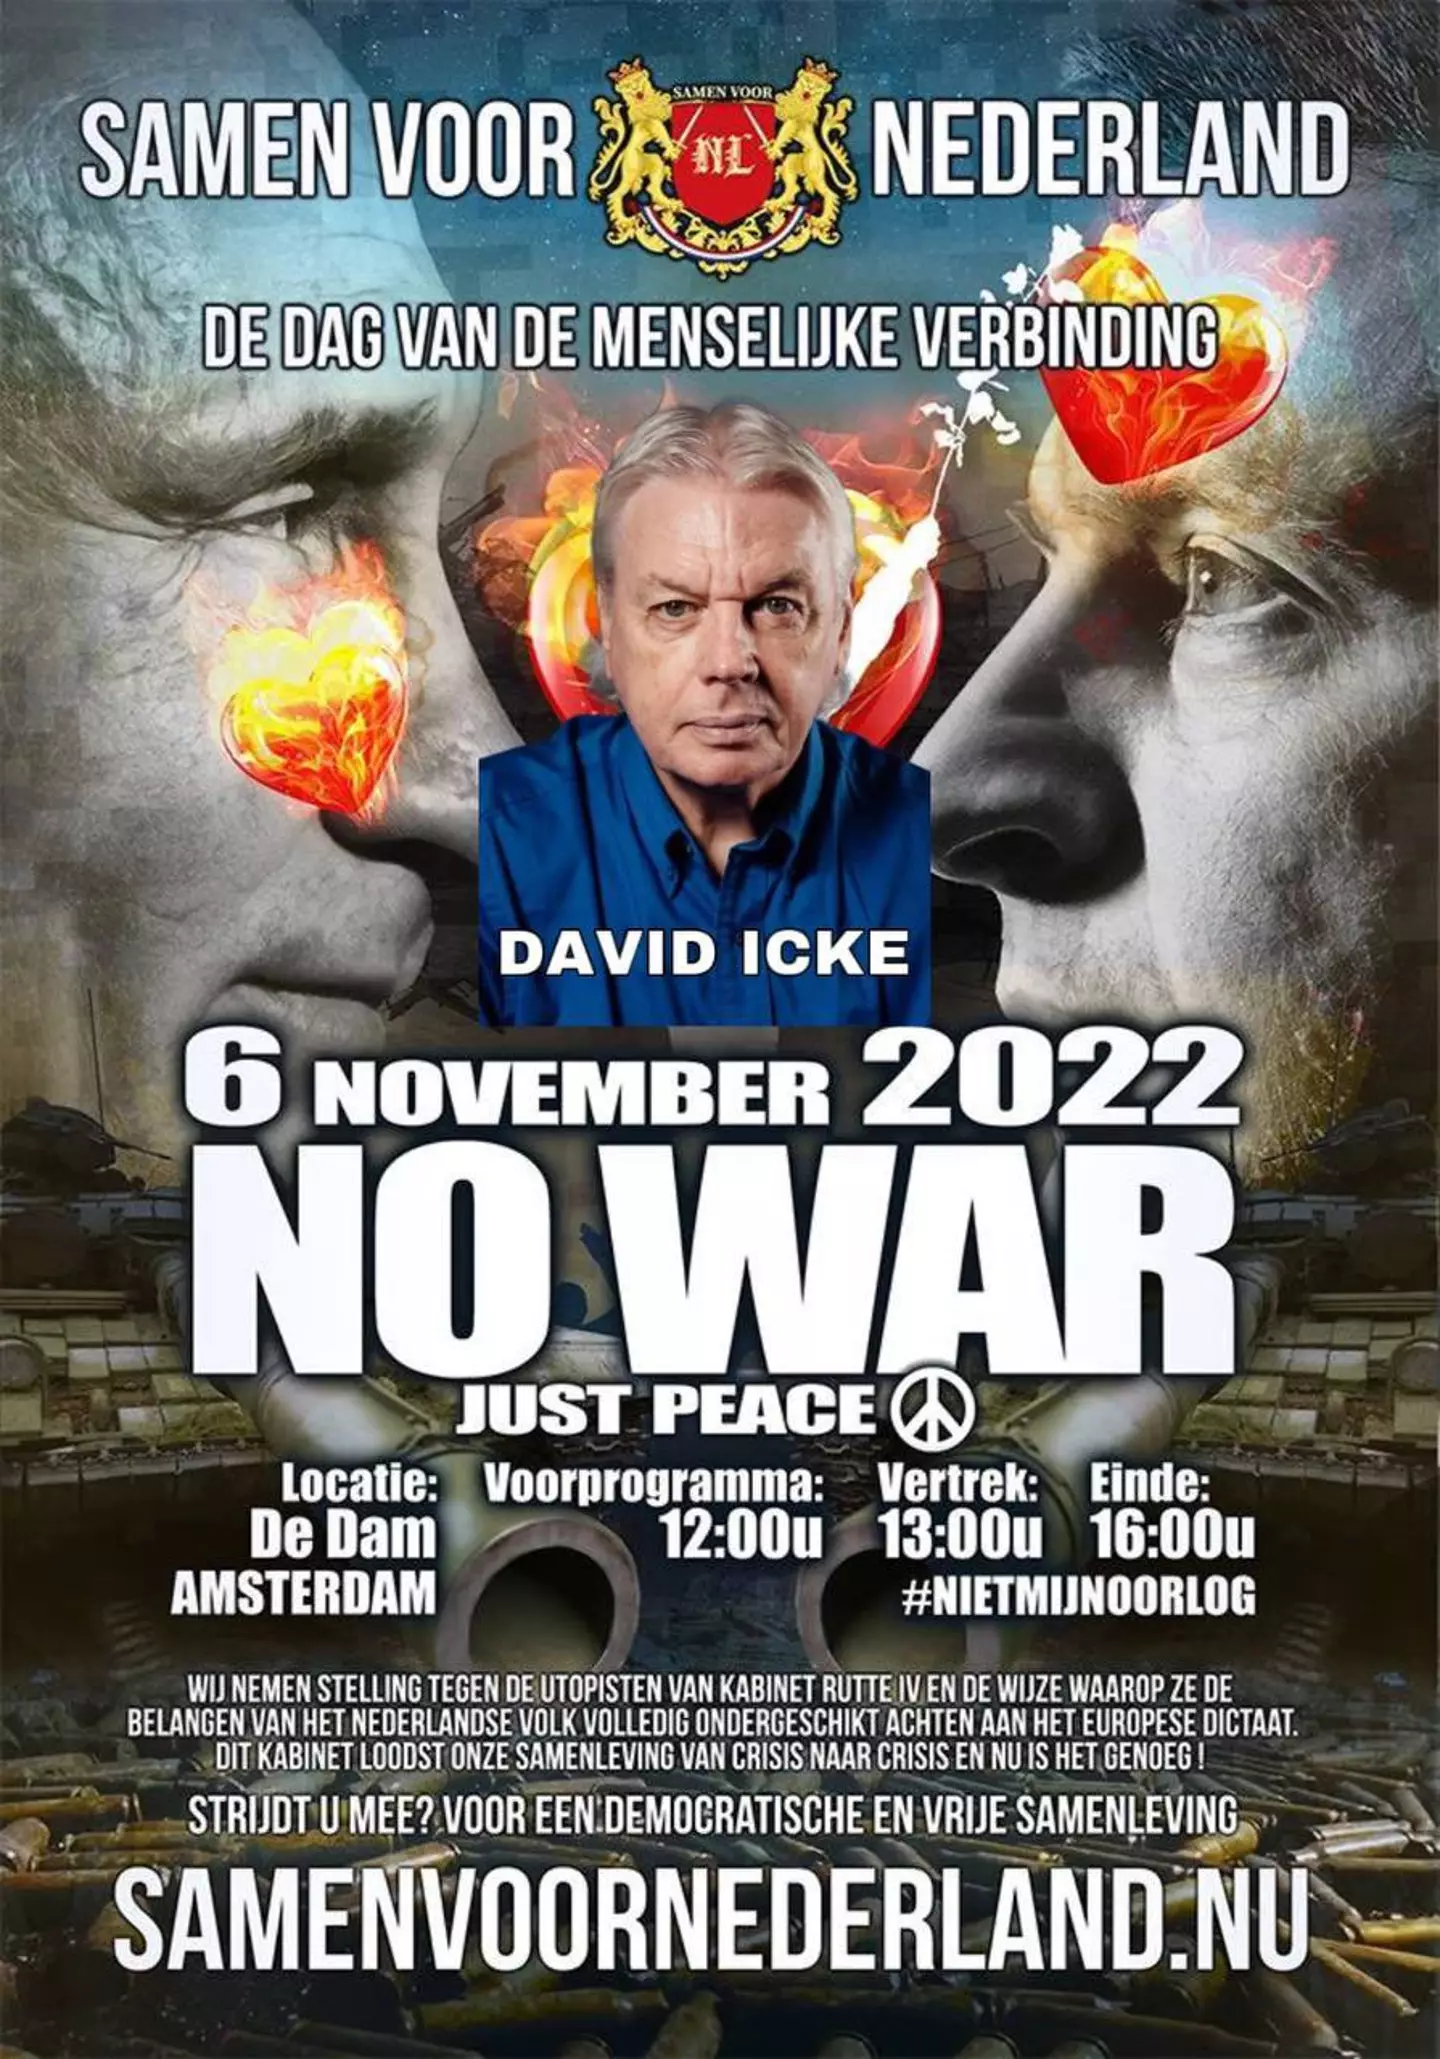 The conspiracy theorist was set to attend the Samen voor Nederland over the weekend.